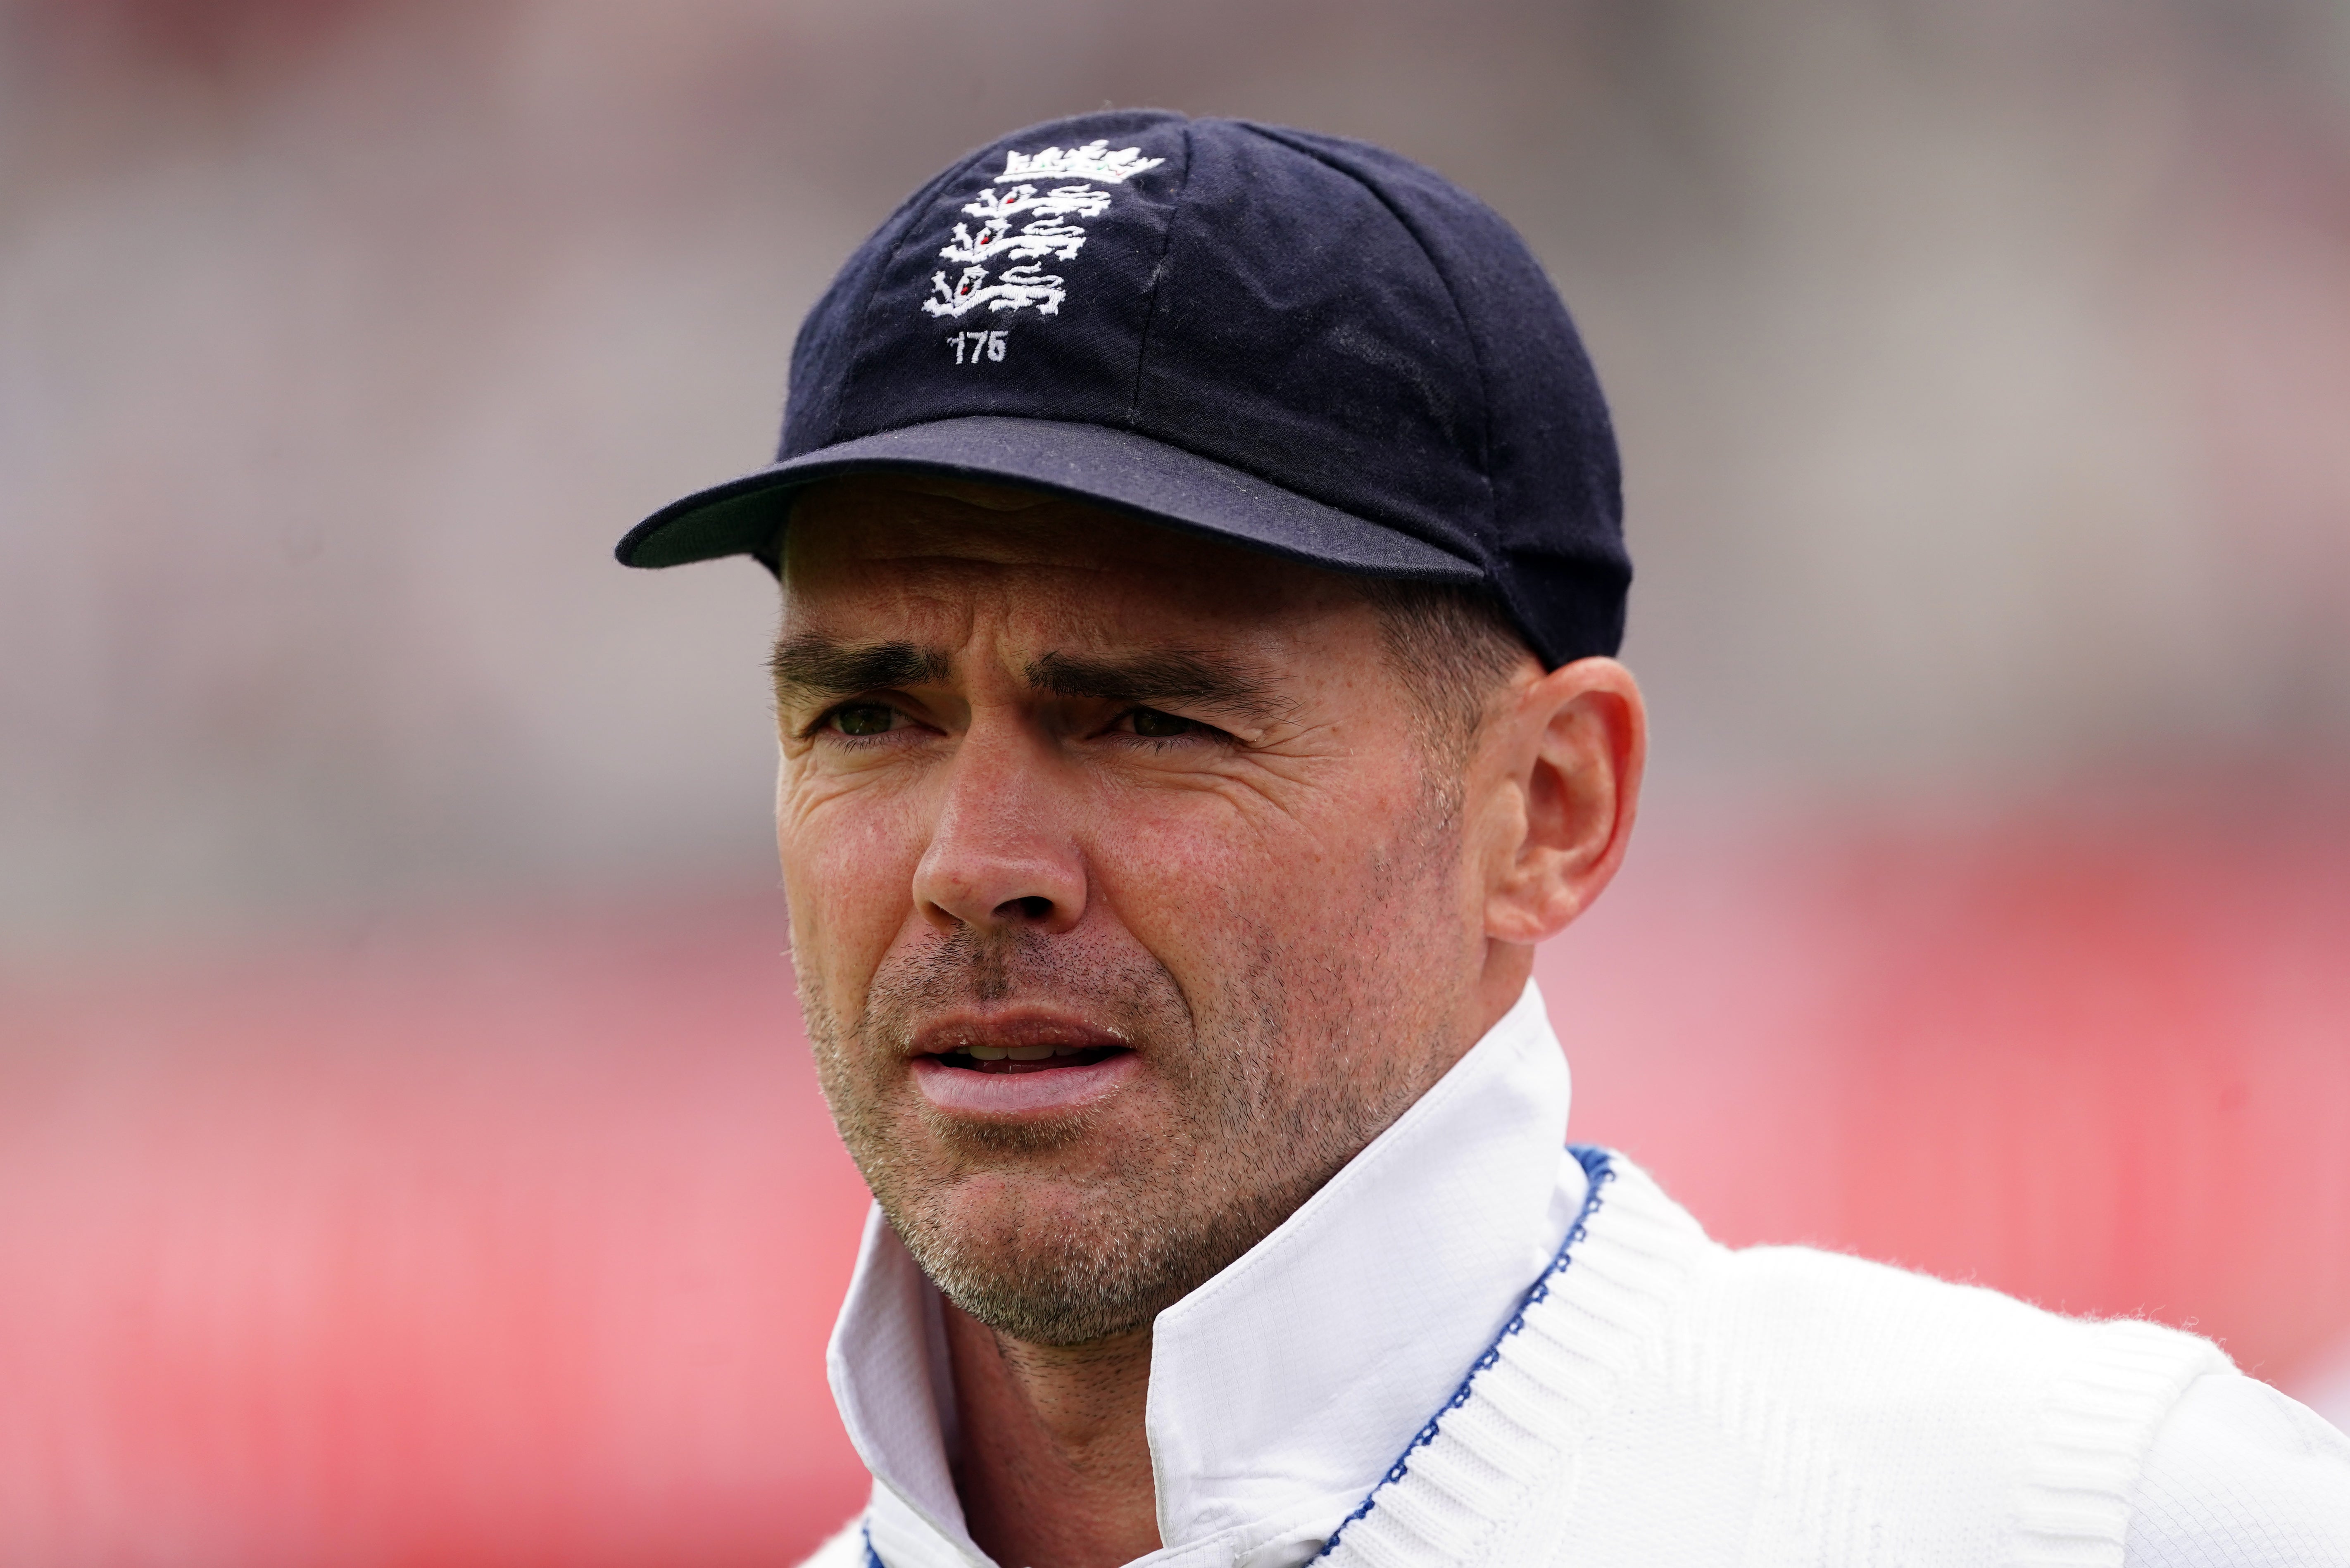 James Anderson is set to play his final Test (Mike Egerton/PA)